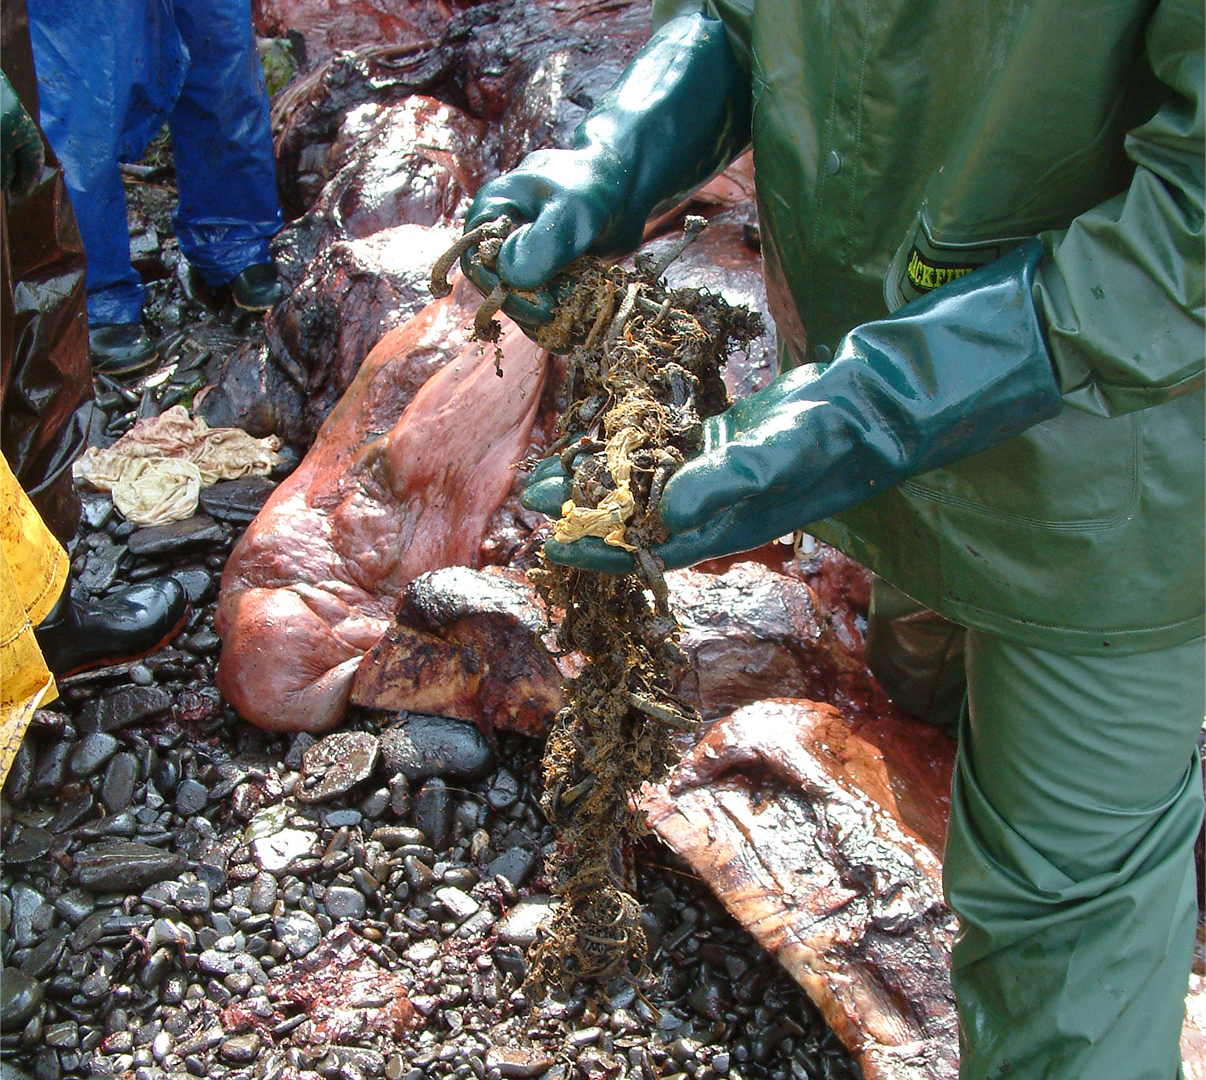 The sperm whale’s digestive tract is being flensed while one person removes a pile of garbage.